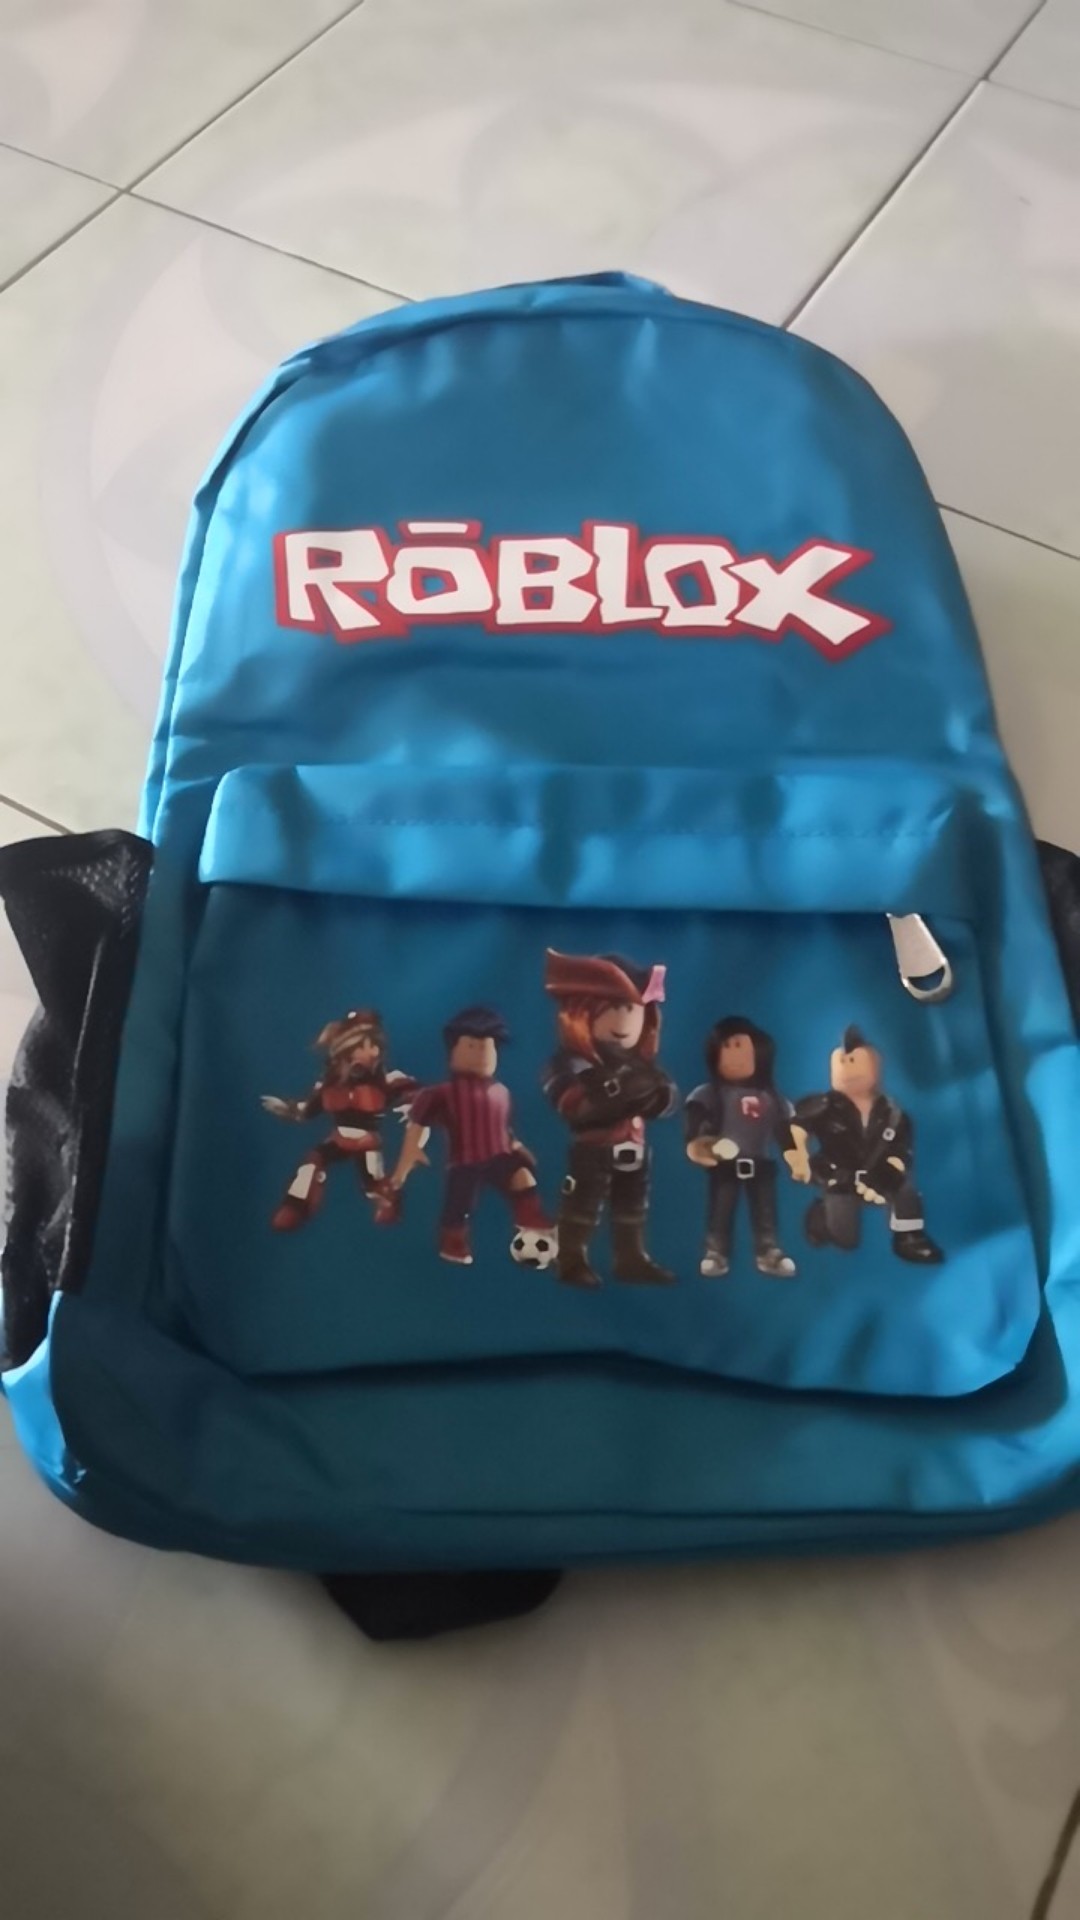 Game Roblox Character Printed School Bags Casual Backpacks Kids Birthday Gifts Children Boys Girl Satchel Shopee Malaysia - ซอทไหน roblox toys games pattern school bags 3 pcs set